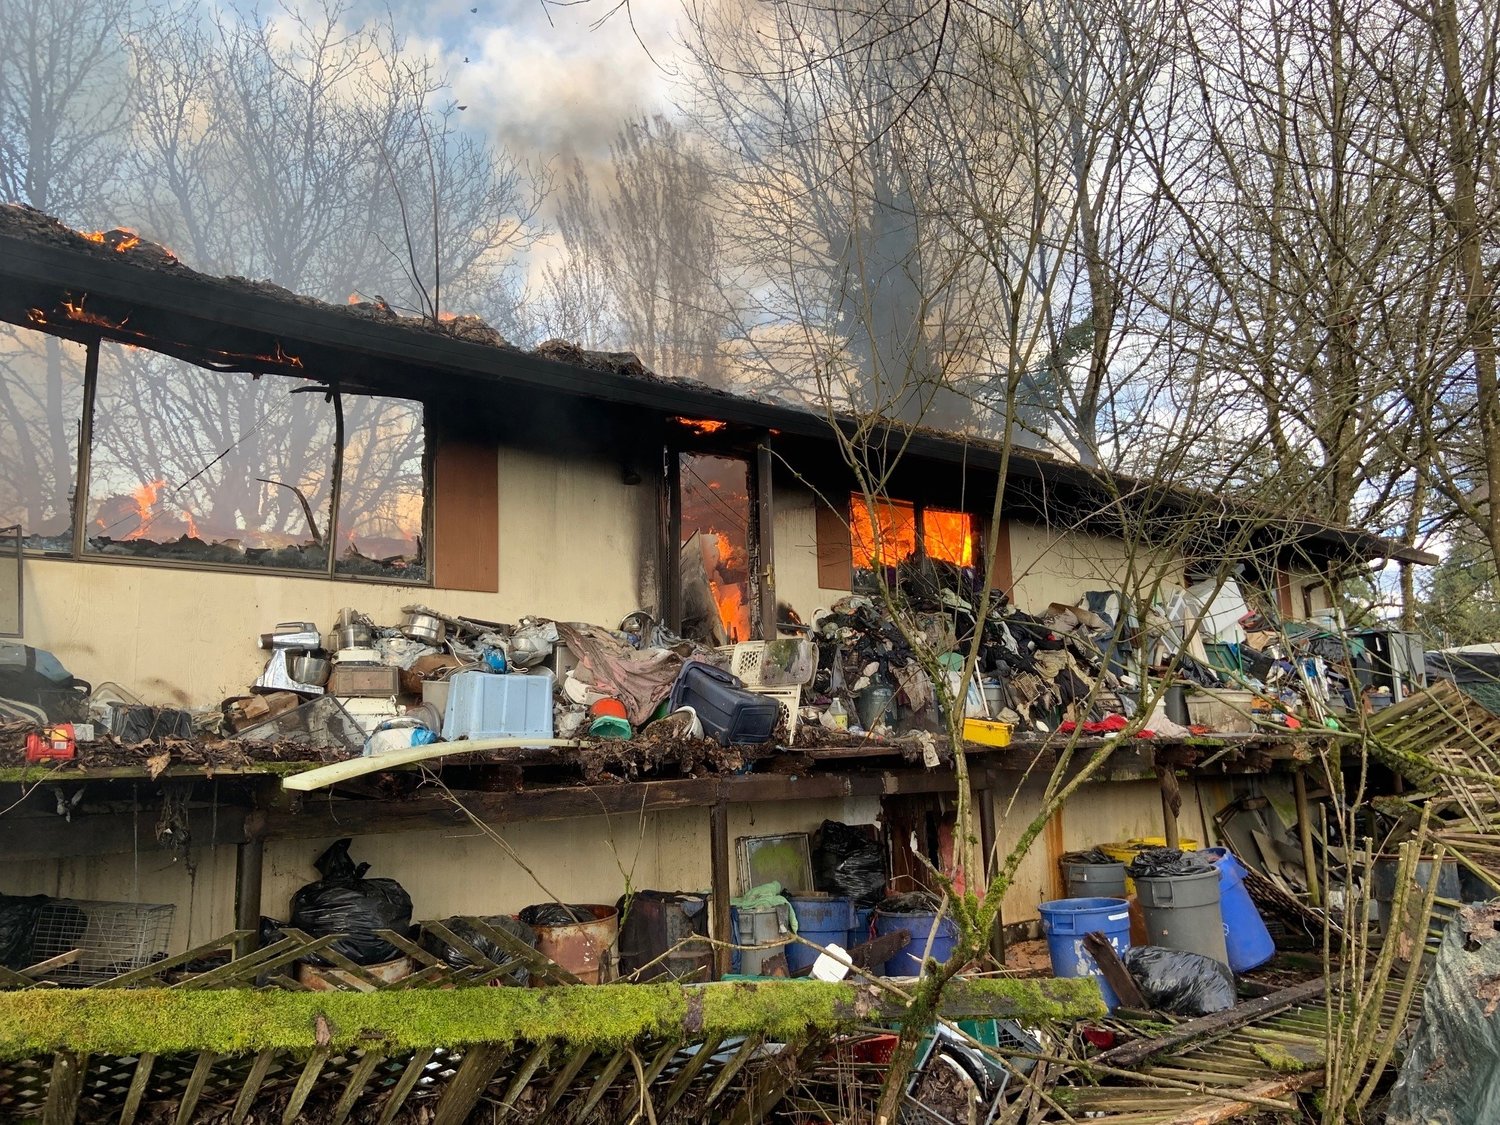 Clutter is pictured on a collapsing deck at the site of a house fire in the Cherry Grove area on March 16.